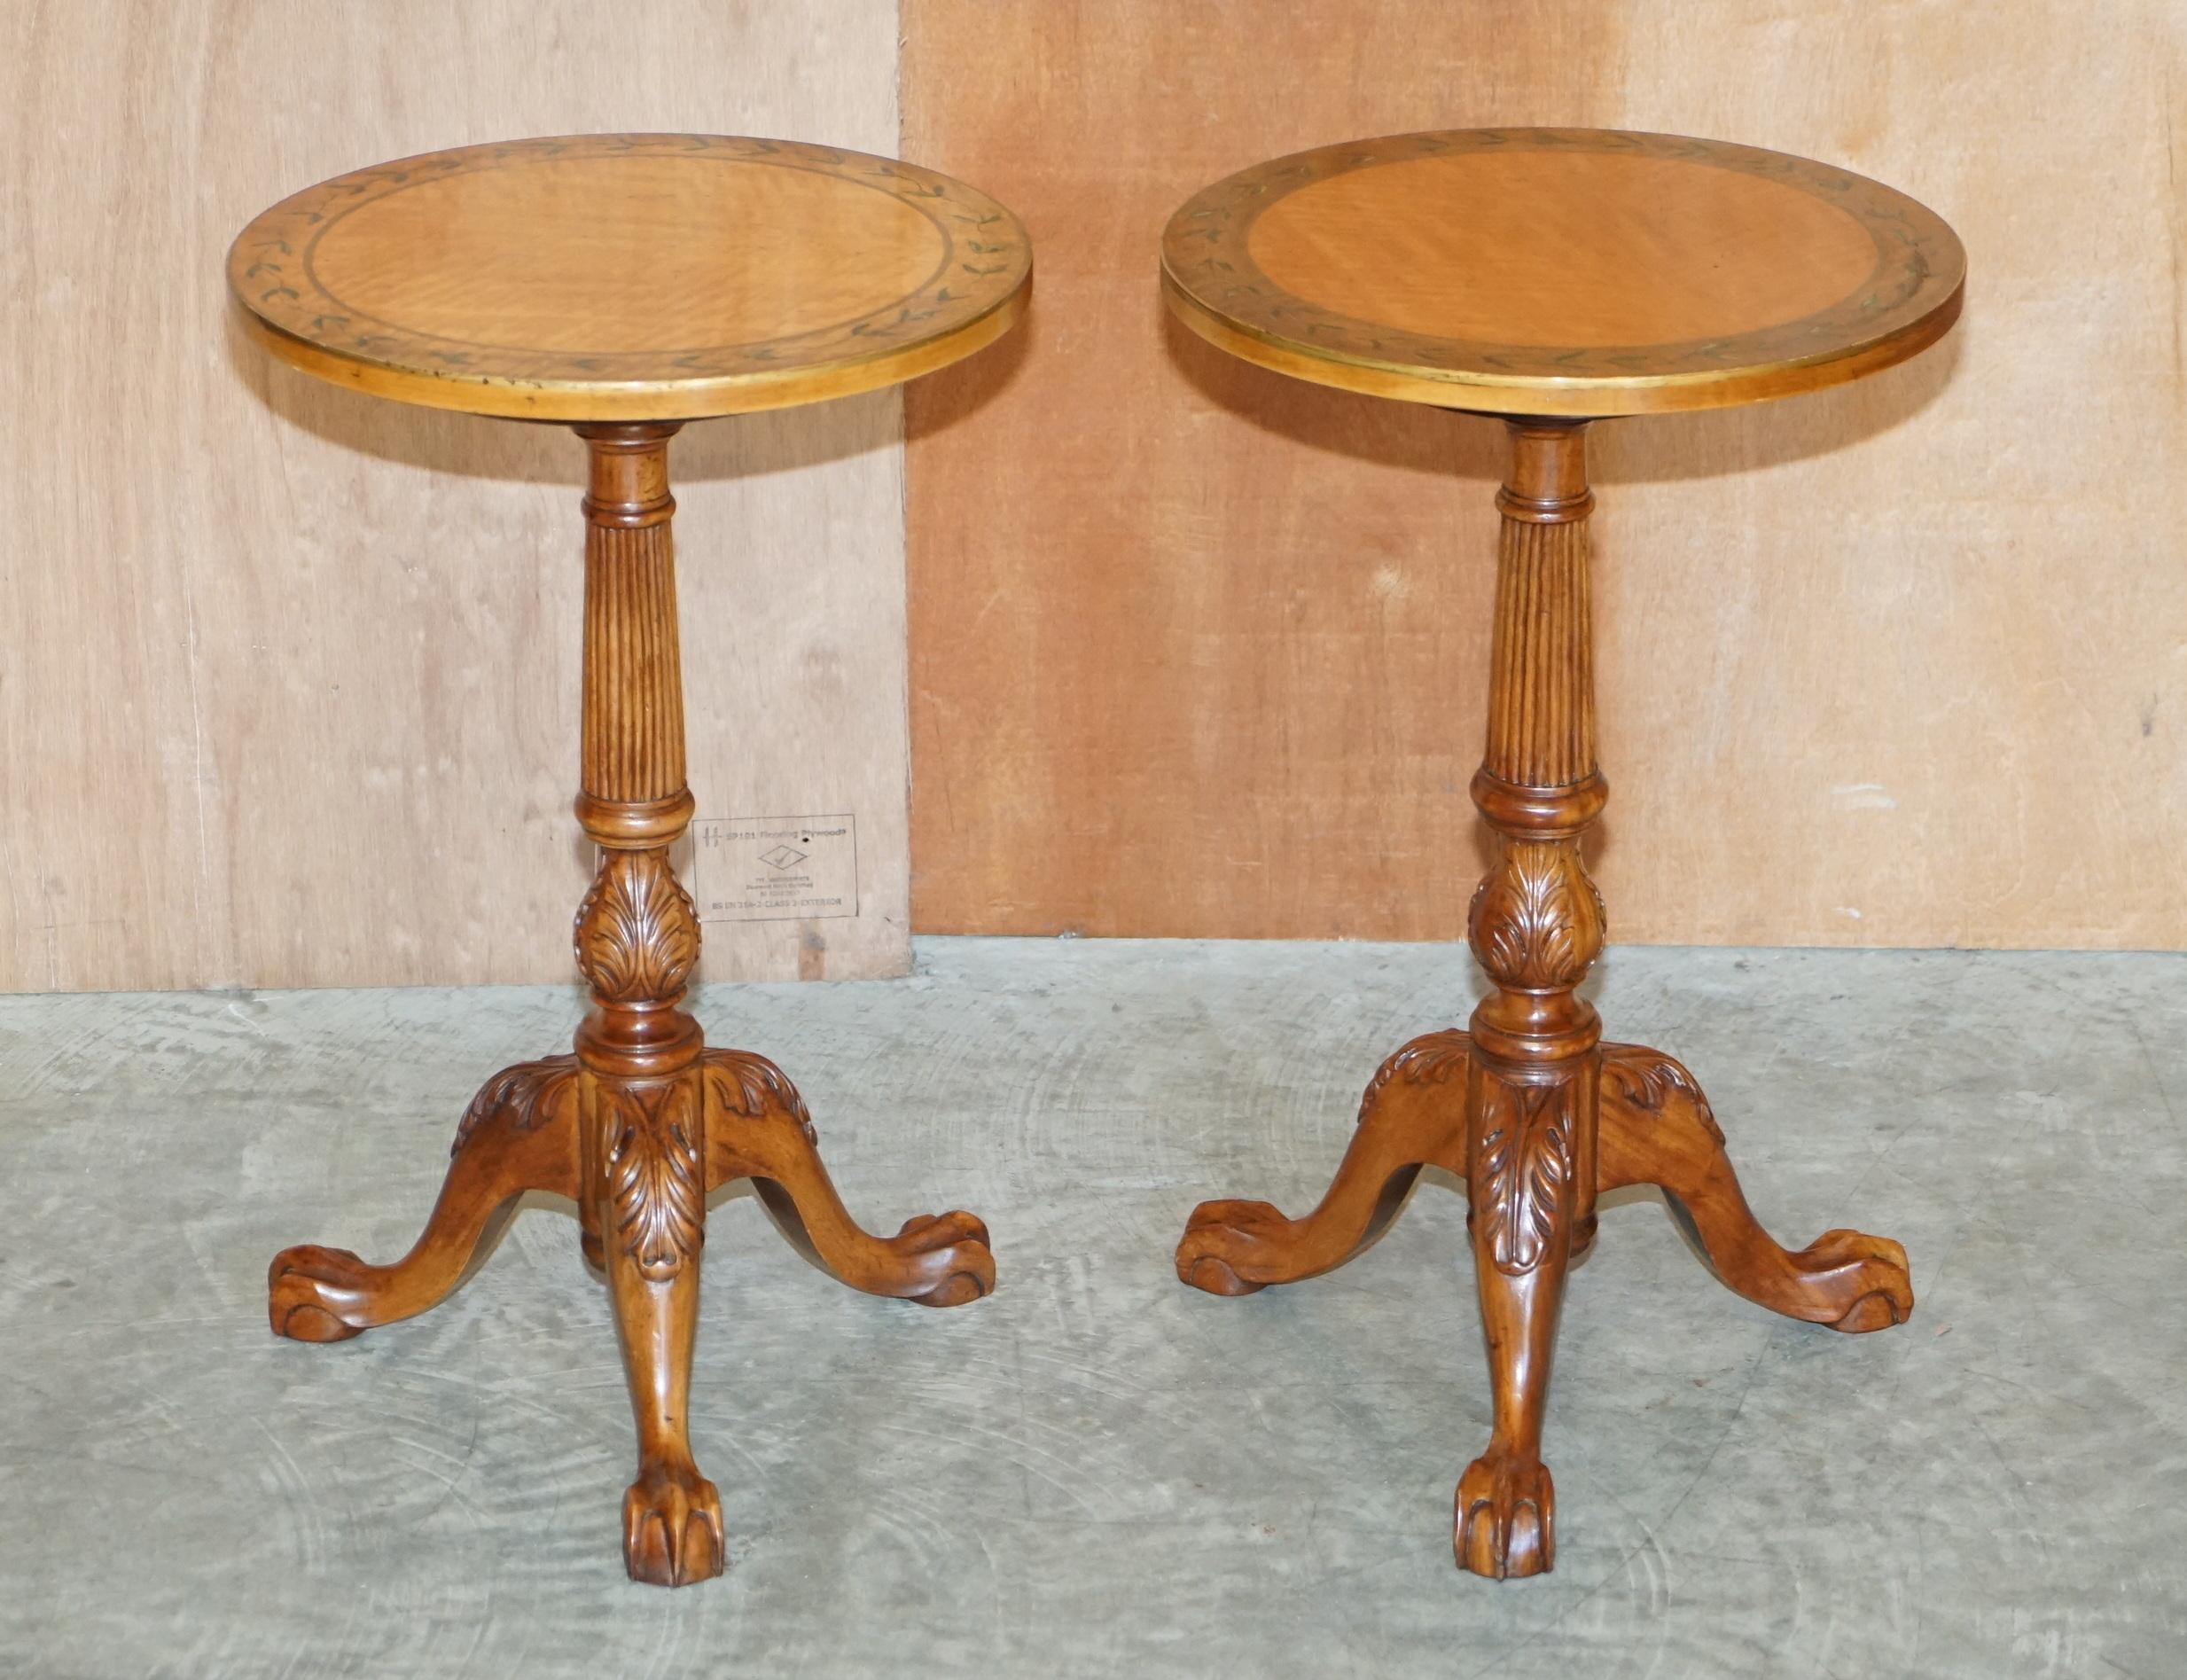 We are delighted to offer this sublime pair of original Sheraton Revival, hand painted Victorian tripod tables with claw & ball feet

A very good looking and well made pair, these tables look expensive and important in any setting. They are